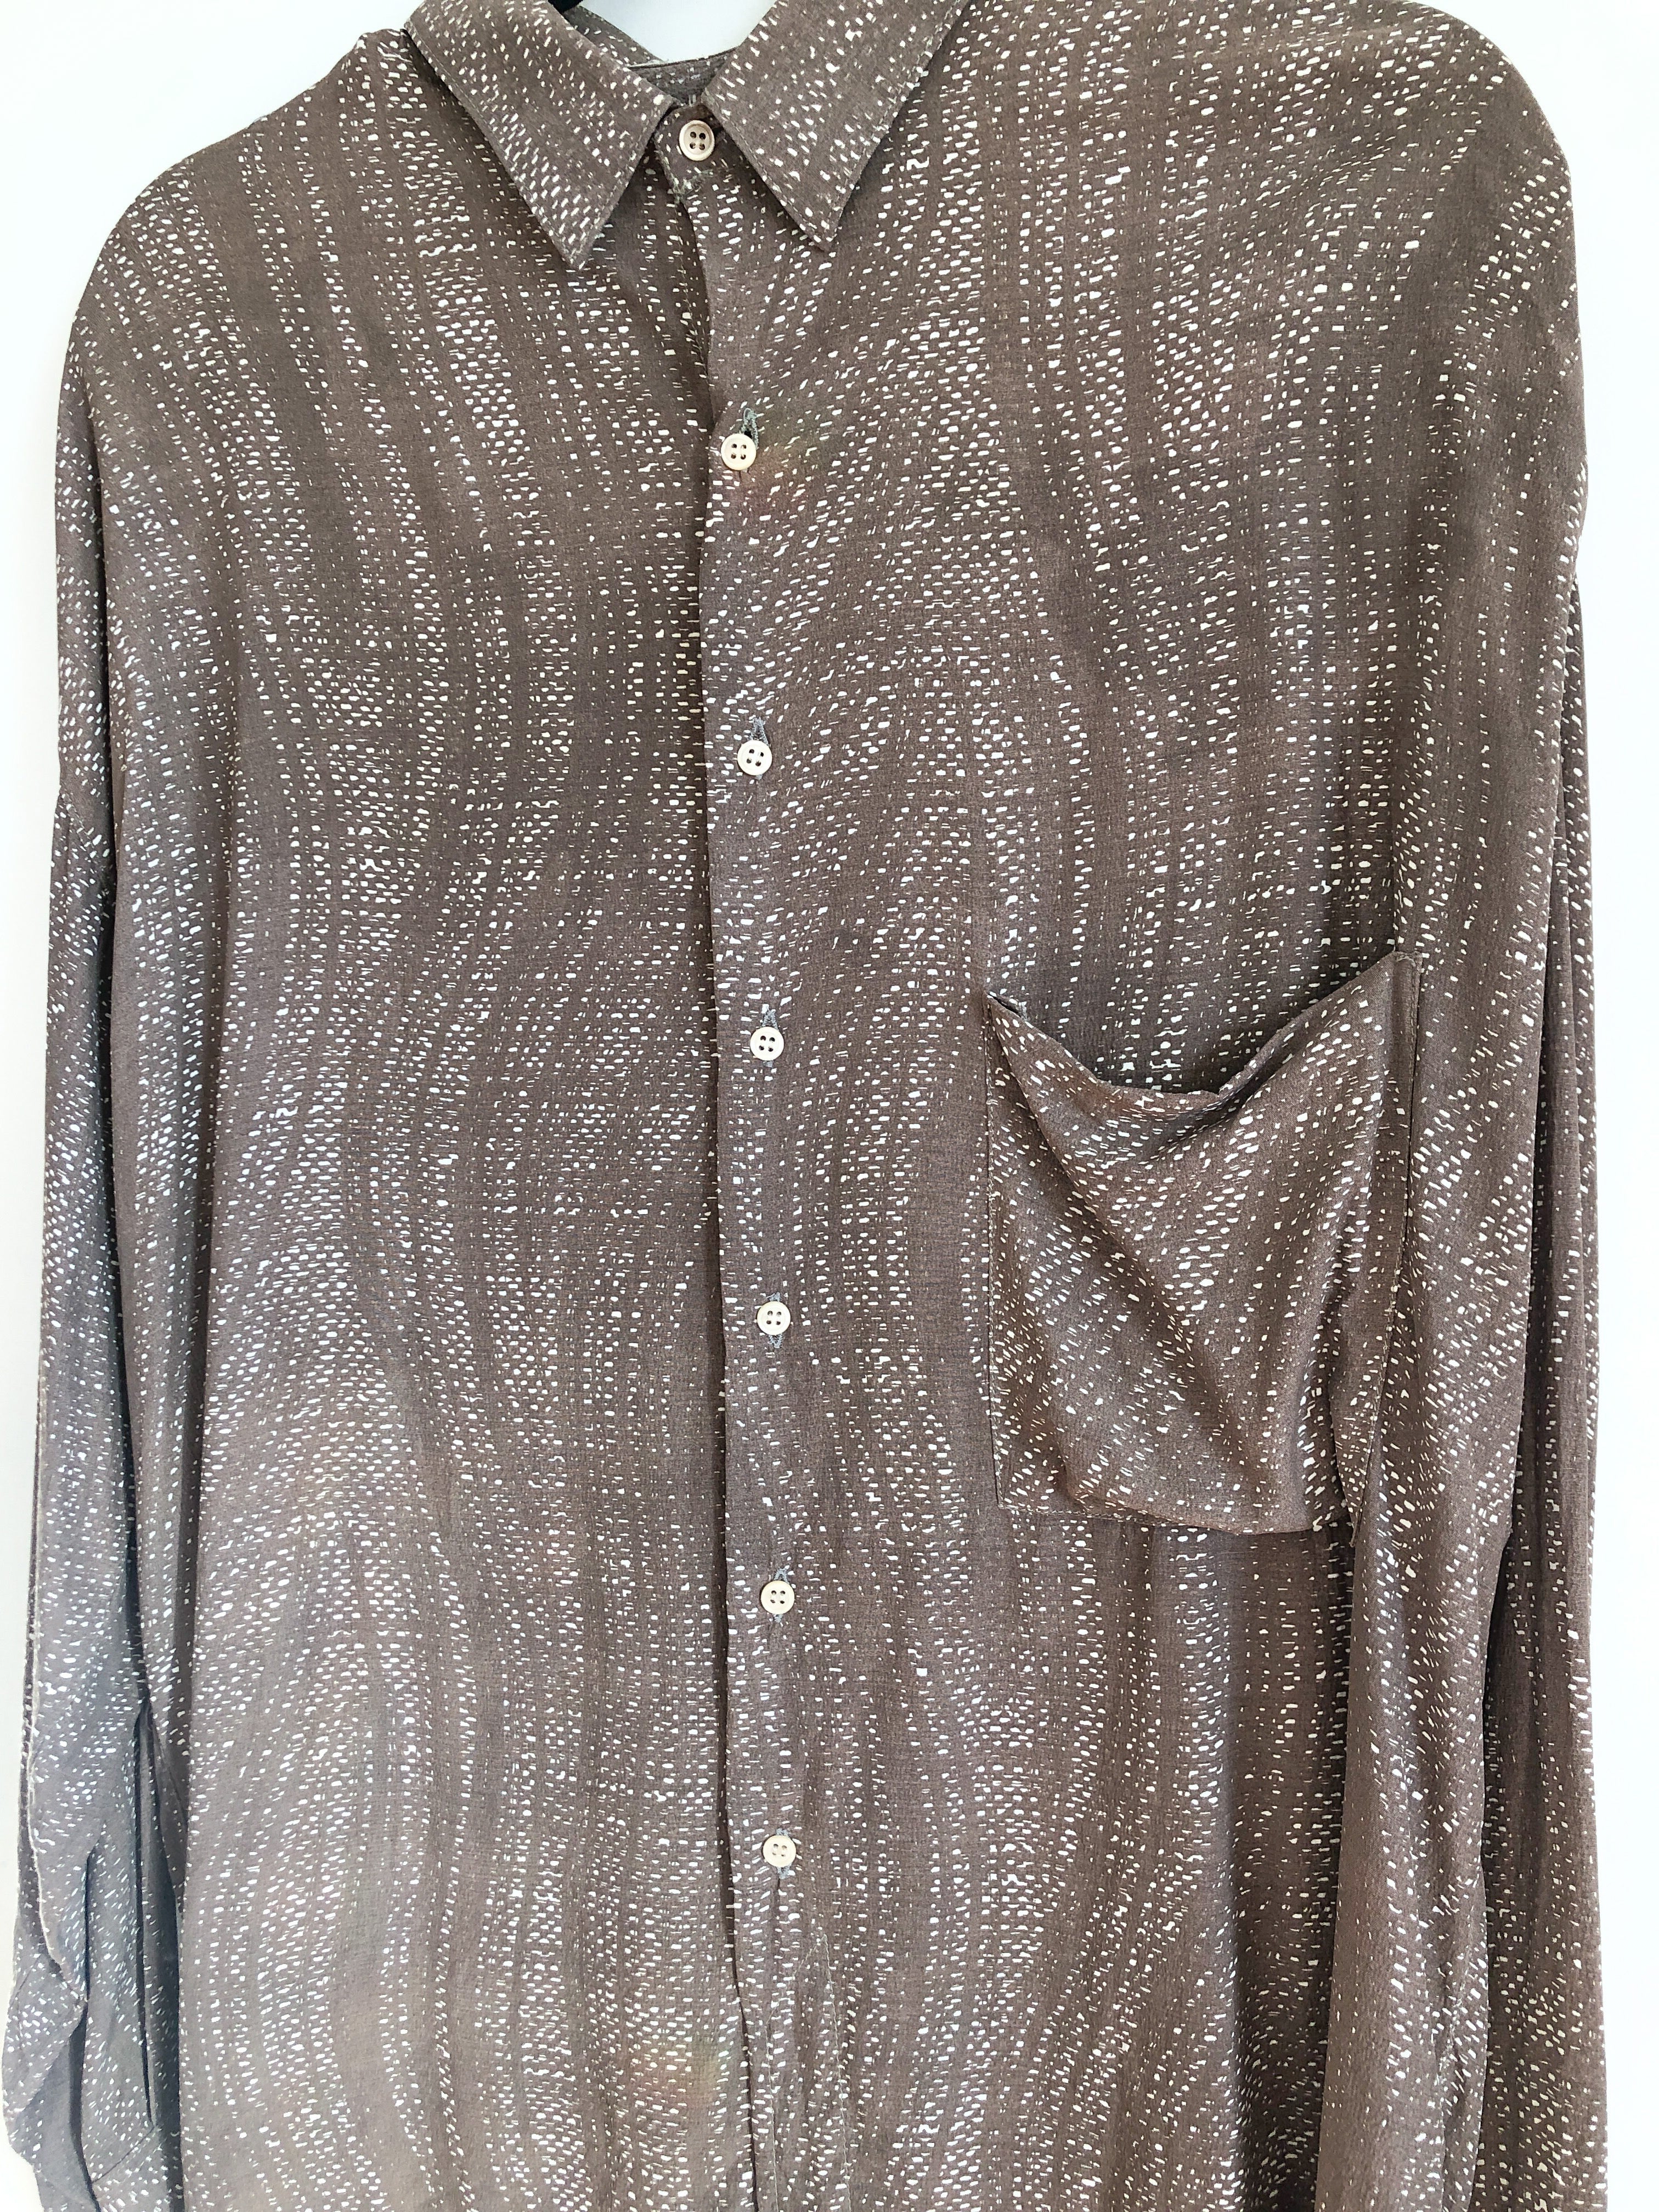 Unisex Silk Wavy Print Oxford Shirt, Abstract Brown Button Up 1980s Vintage Faux Valentino